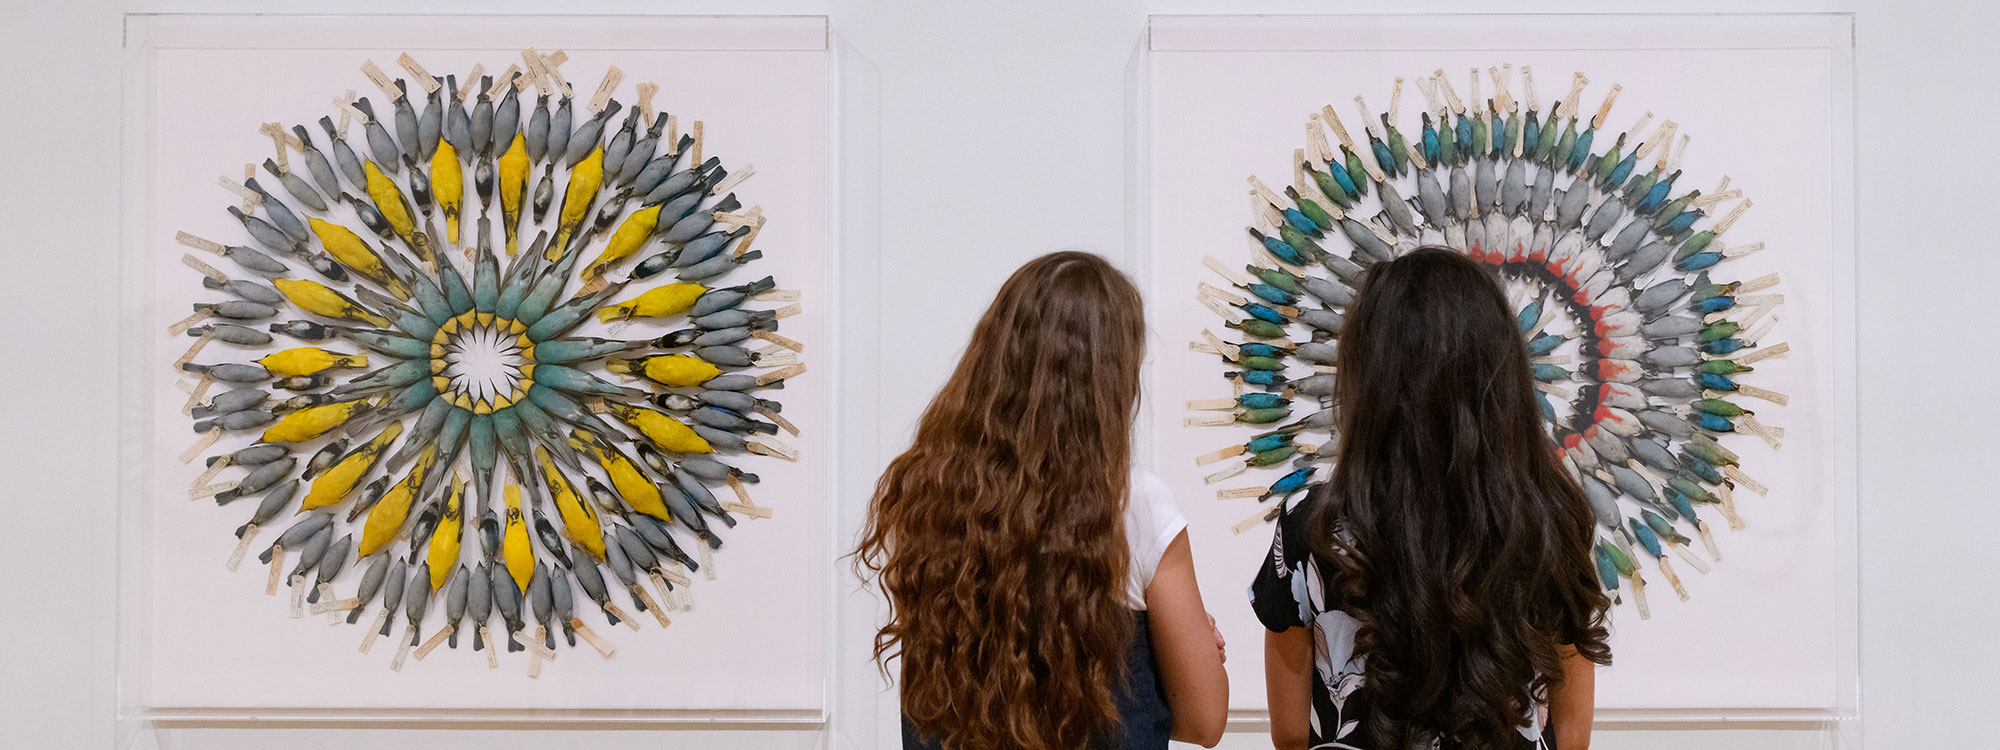 @ young women looking at a museum installatio of birds set in large circular formation